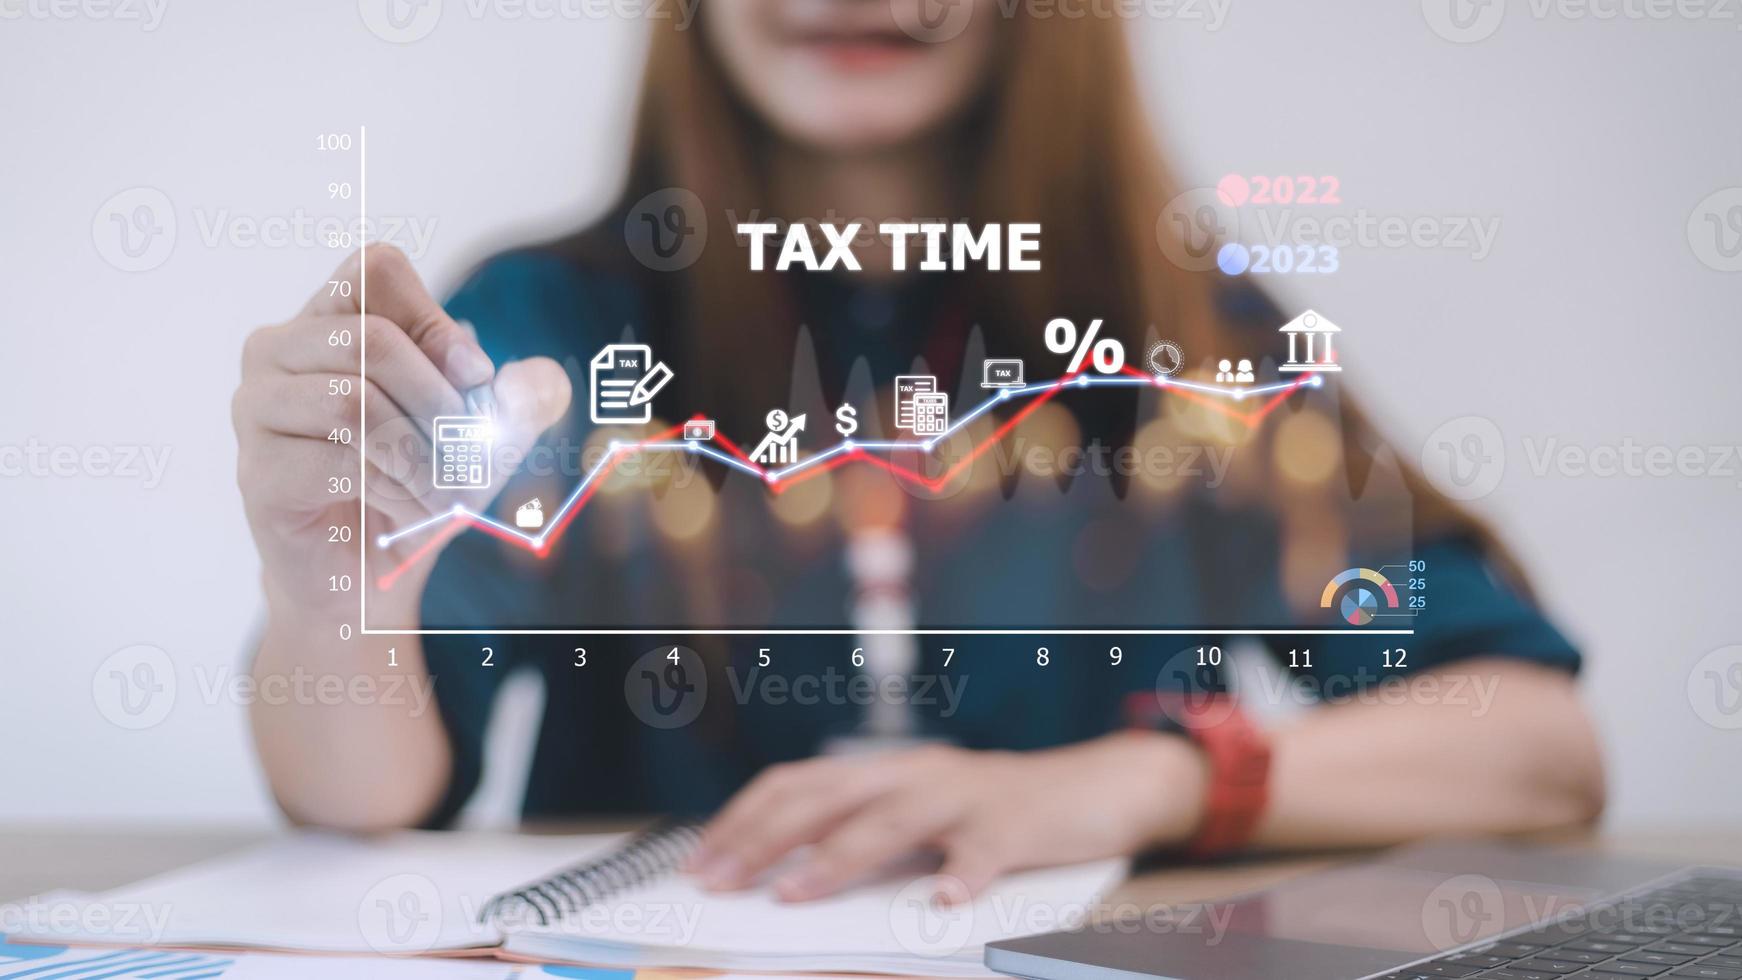 Concept of tax payment optimization business finance, people with taxes icon on technology screen, income tax and property, background for business, individuals and corporations such as VAT photo